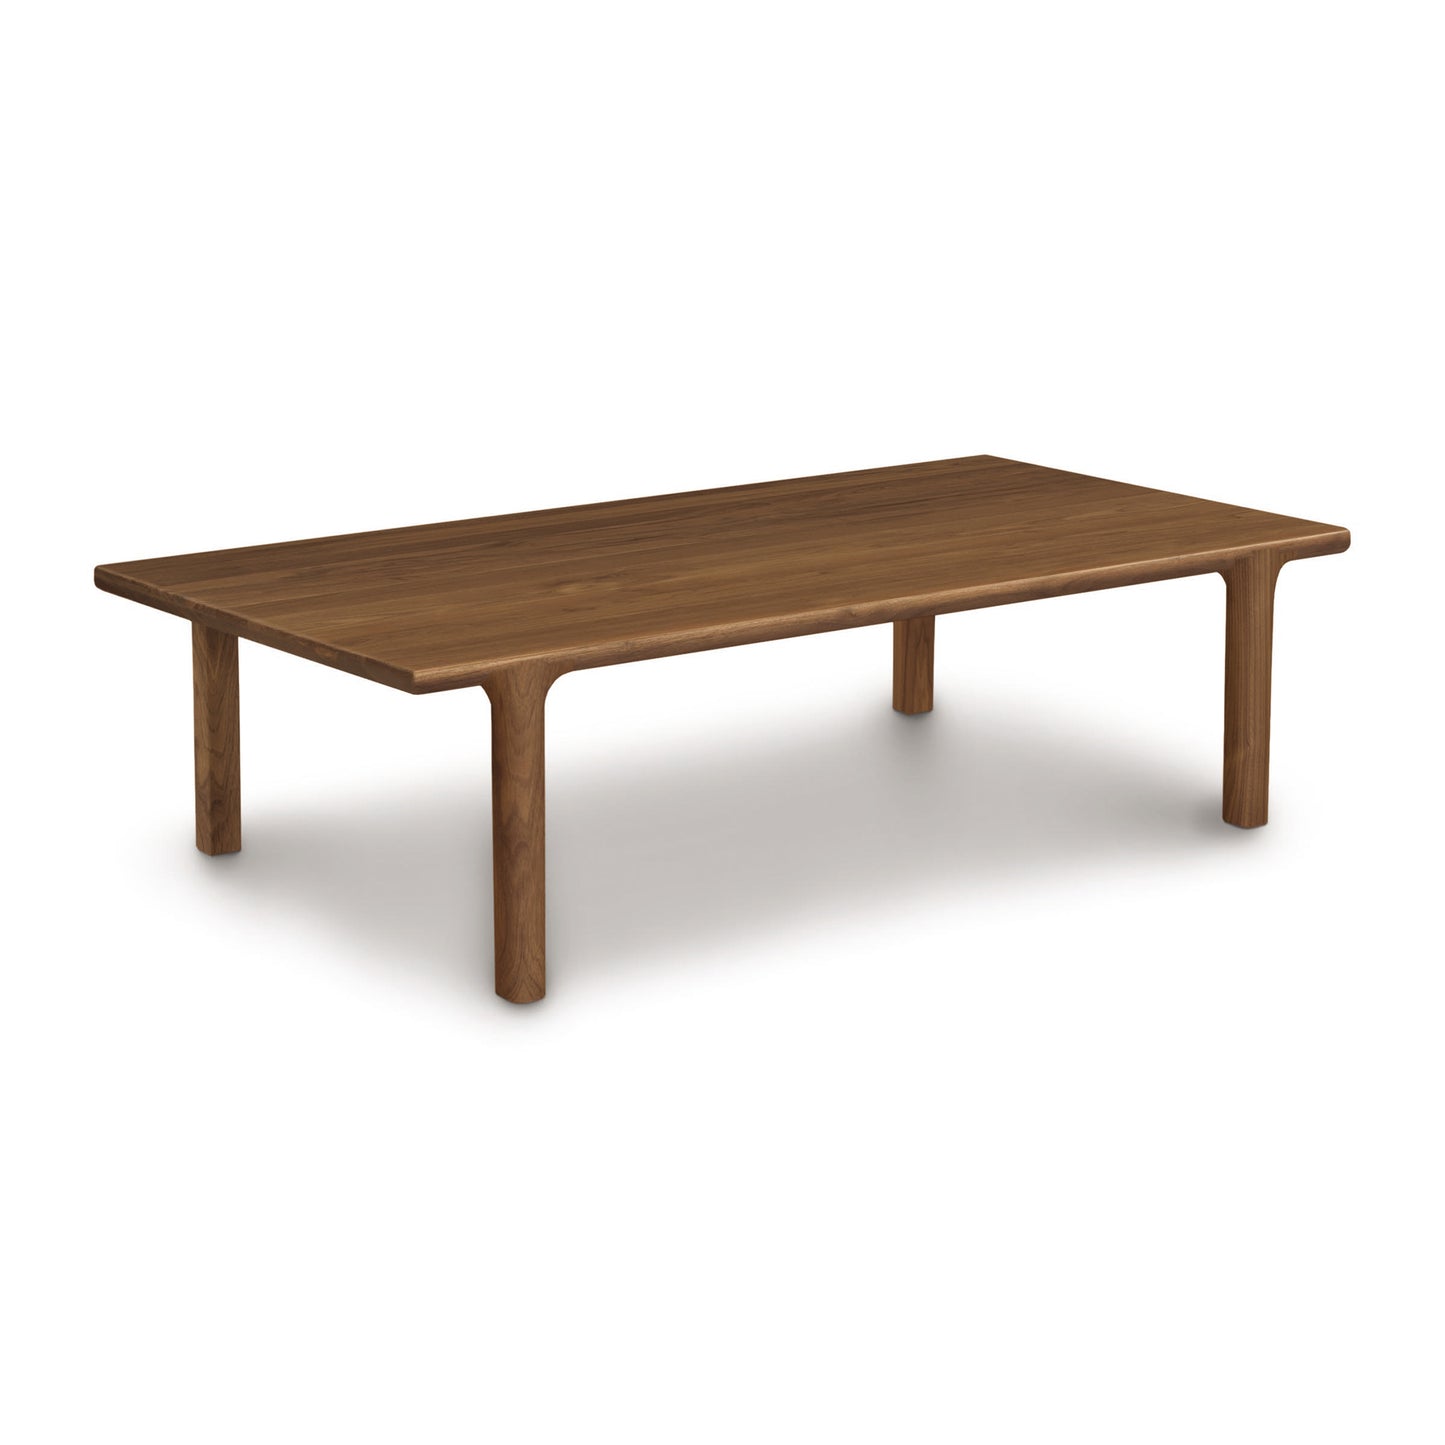 A solid North American hardwood Sierra Rectangular Coffee Table with four legs on a white background, part of the Copeland Furniture Sierra Rectangular Coffee Table series.